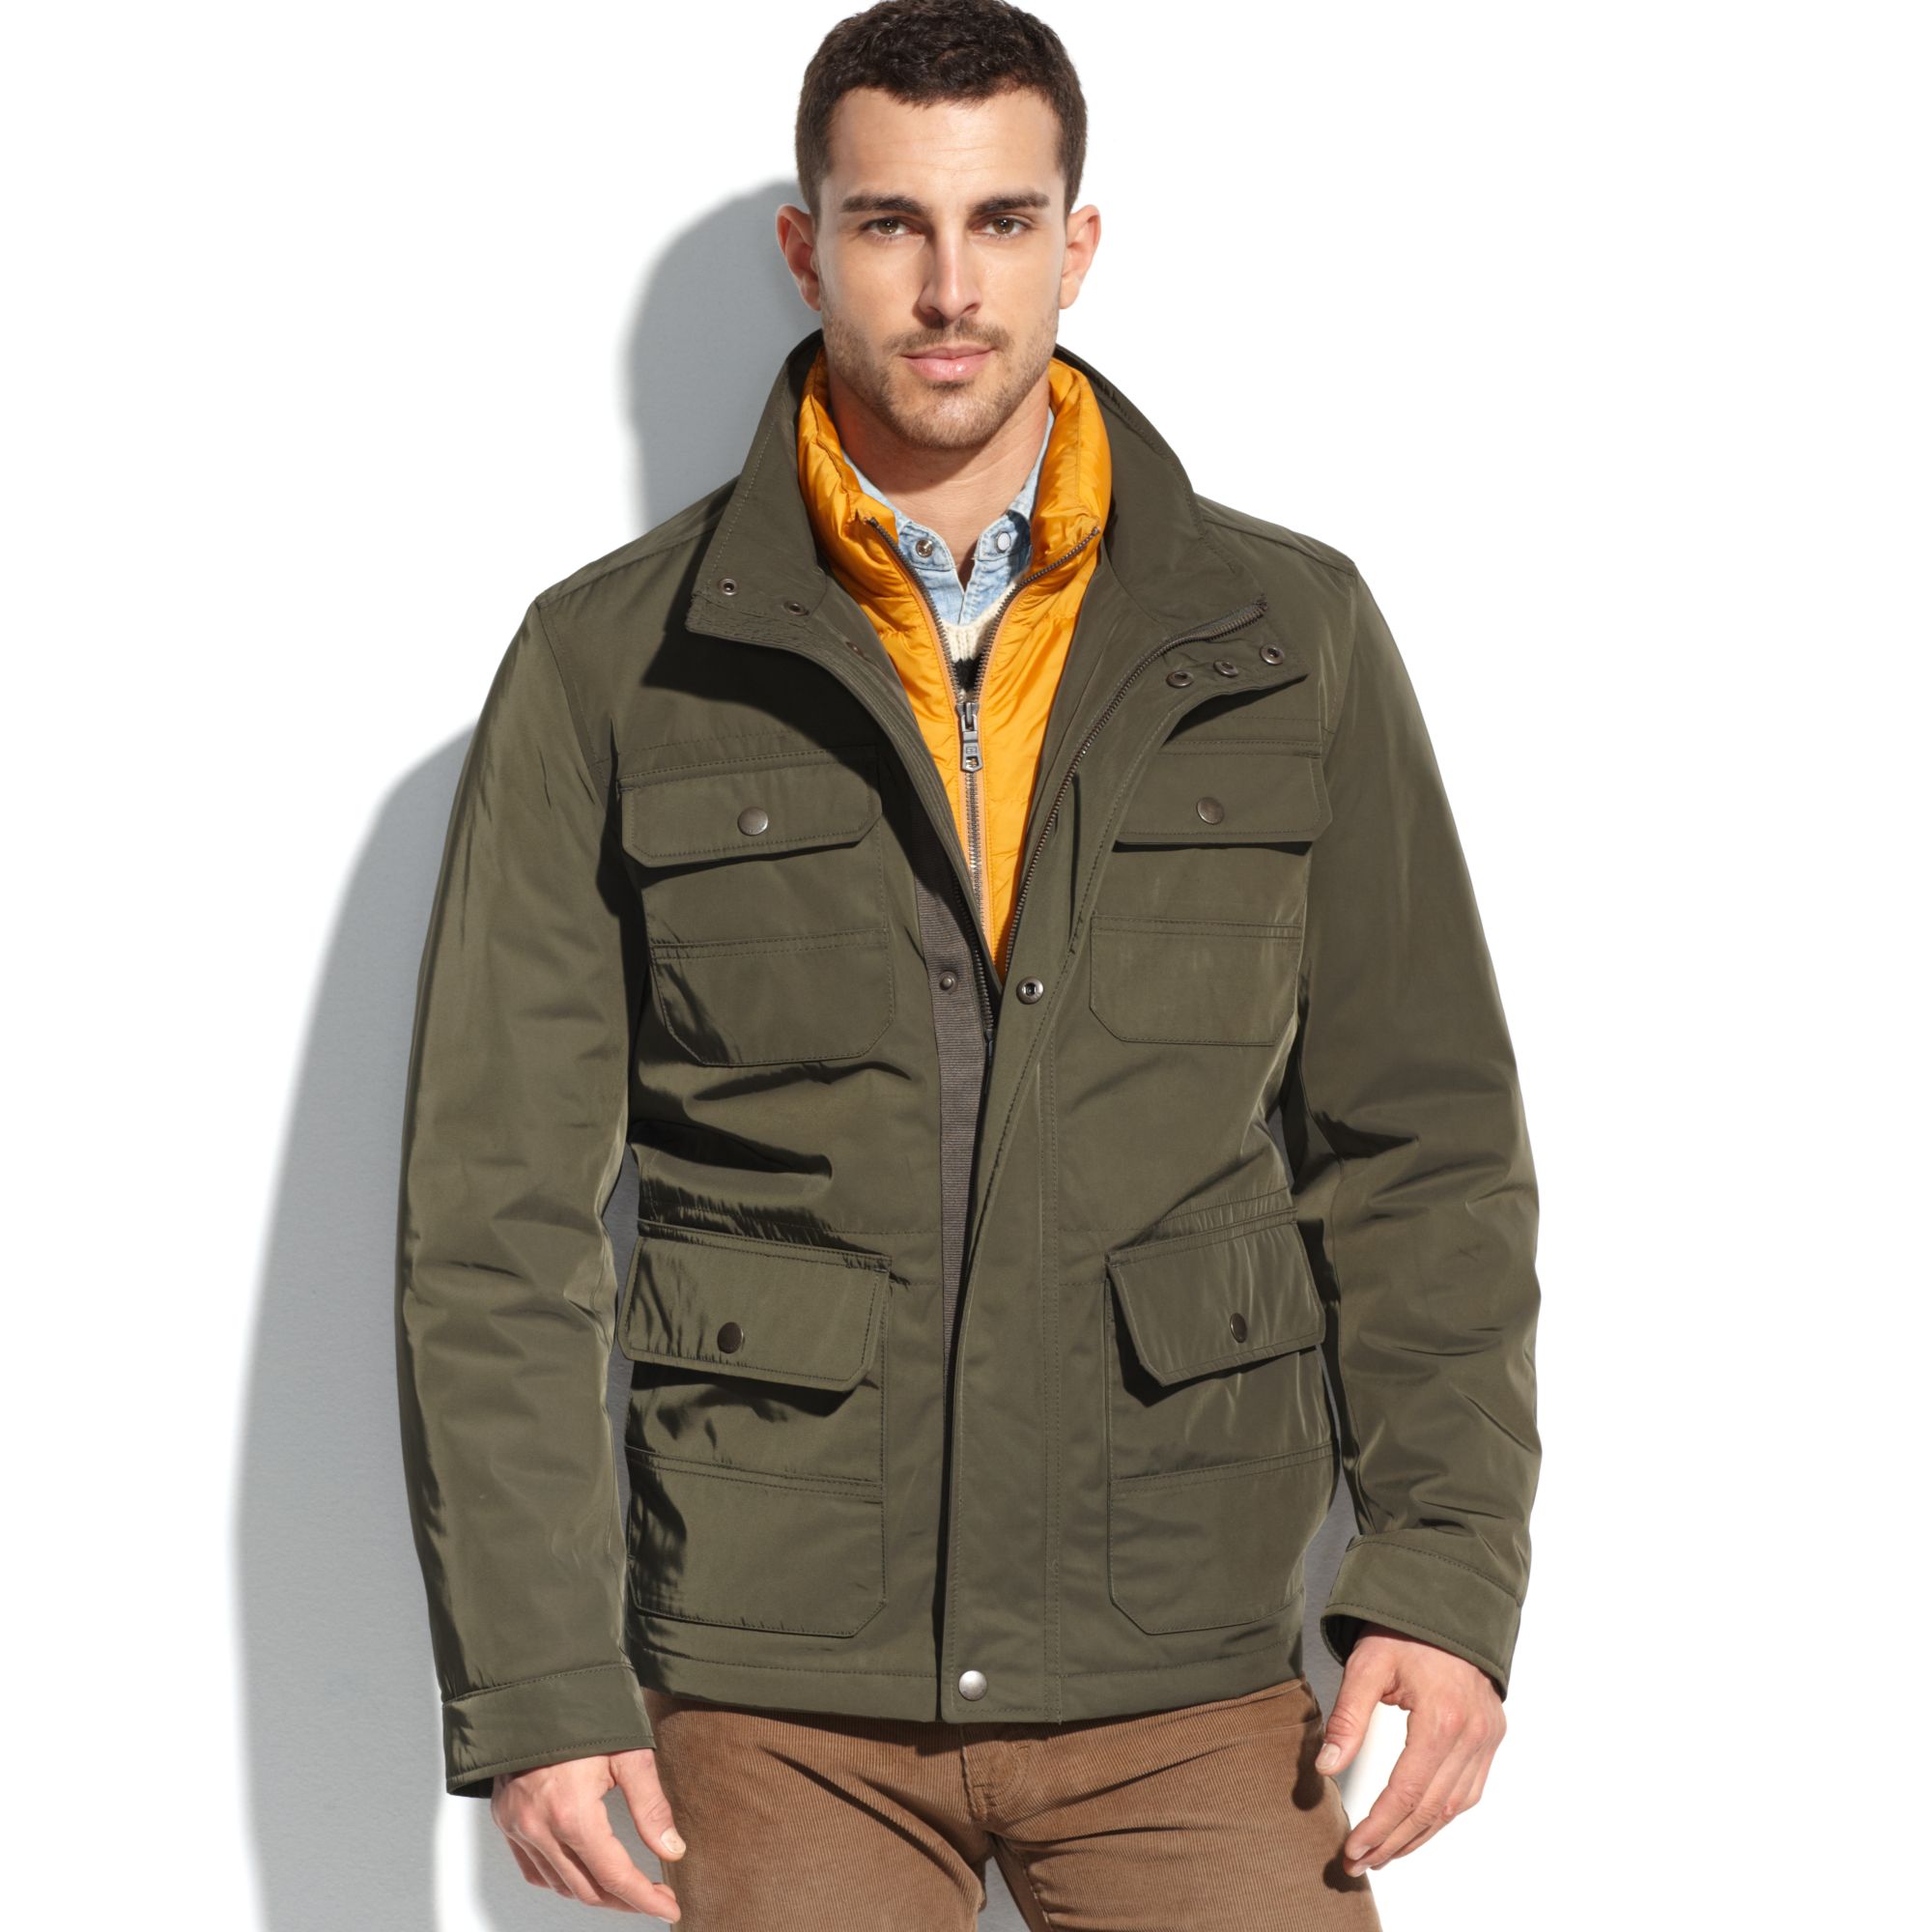 Lyst - Tommy hilfiger Quilted Bib 4pocket Field Coat in Green for Men